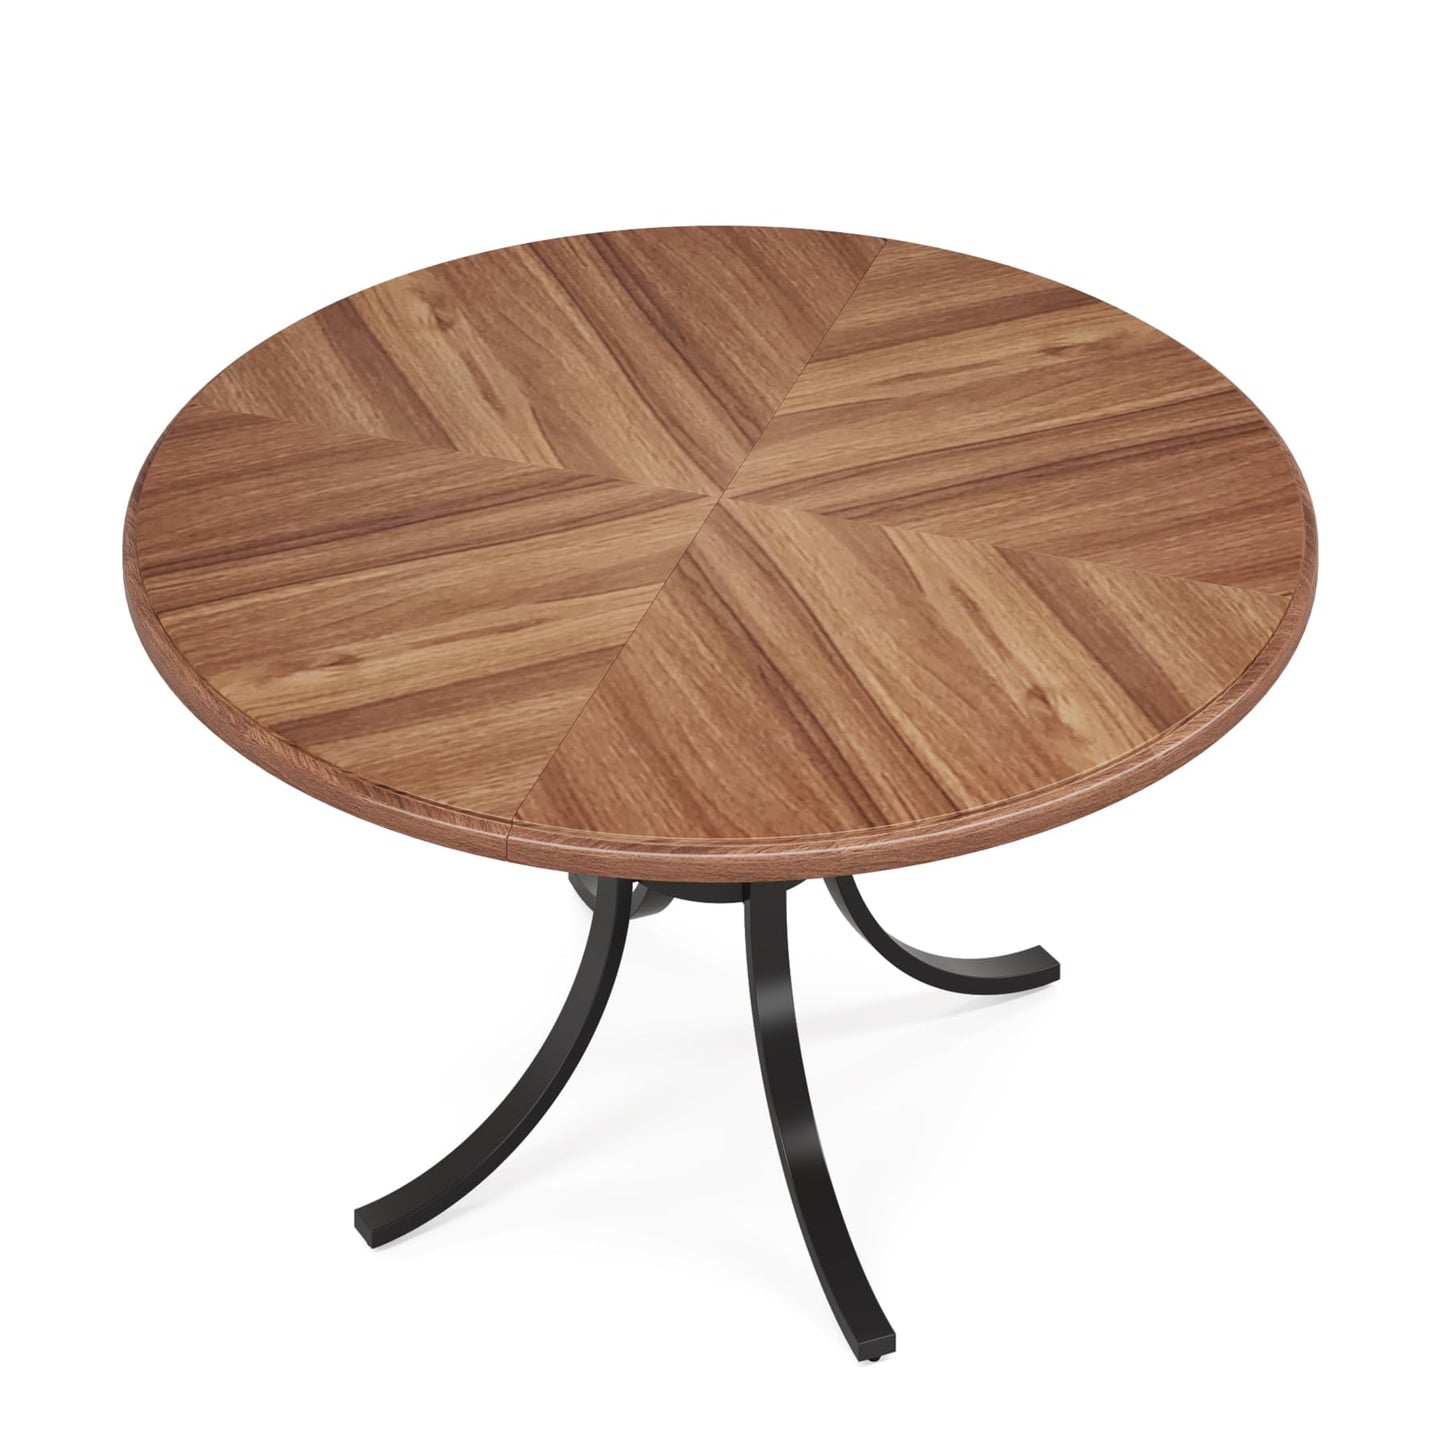 Tribesigns 47" Round Dining Table for 4-6 People, Farmhouse Kitchen Table with Wooden Texture Surface & Pedestal Base, Round Table for Dining Room, Living Room （Only Table） (Brown)